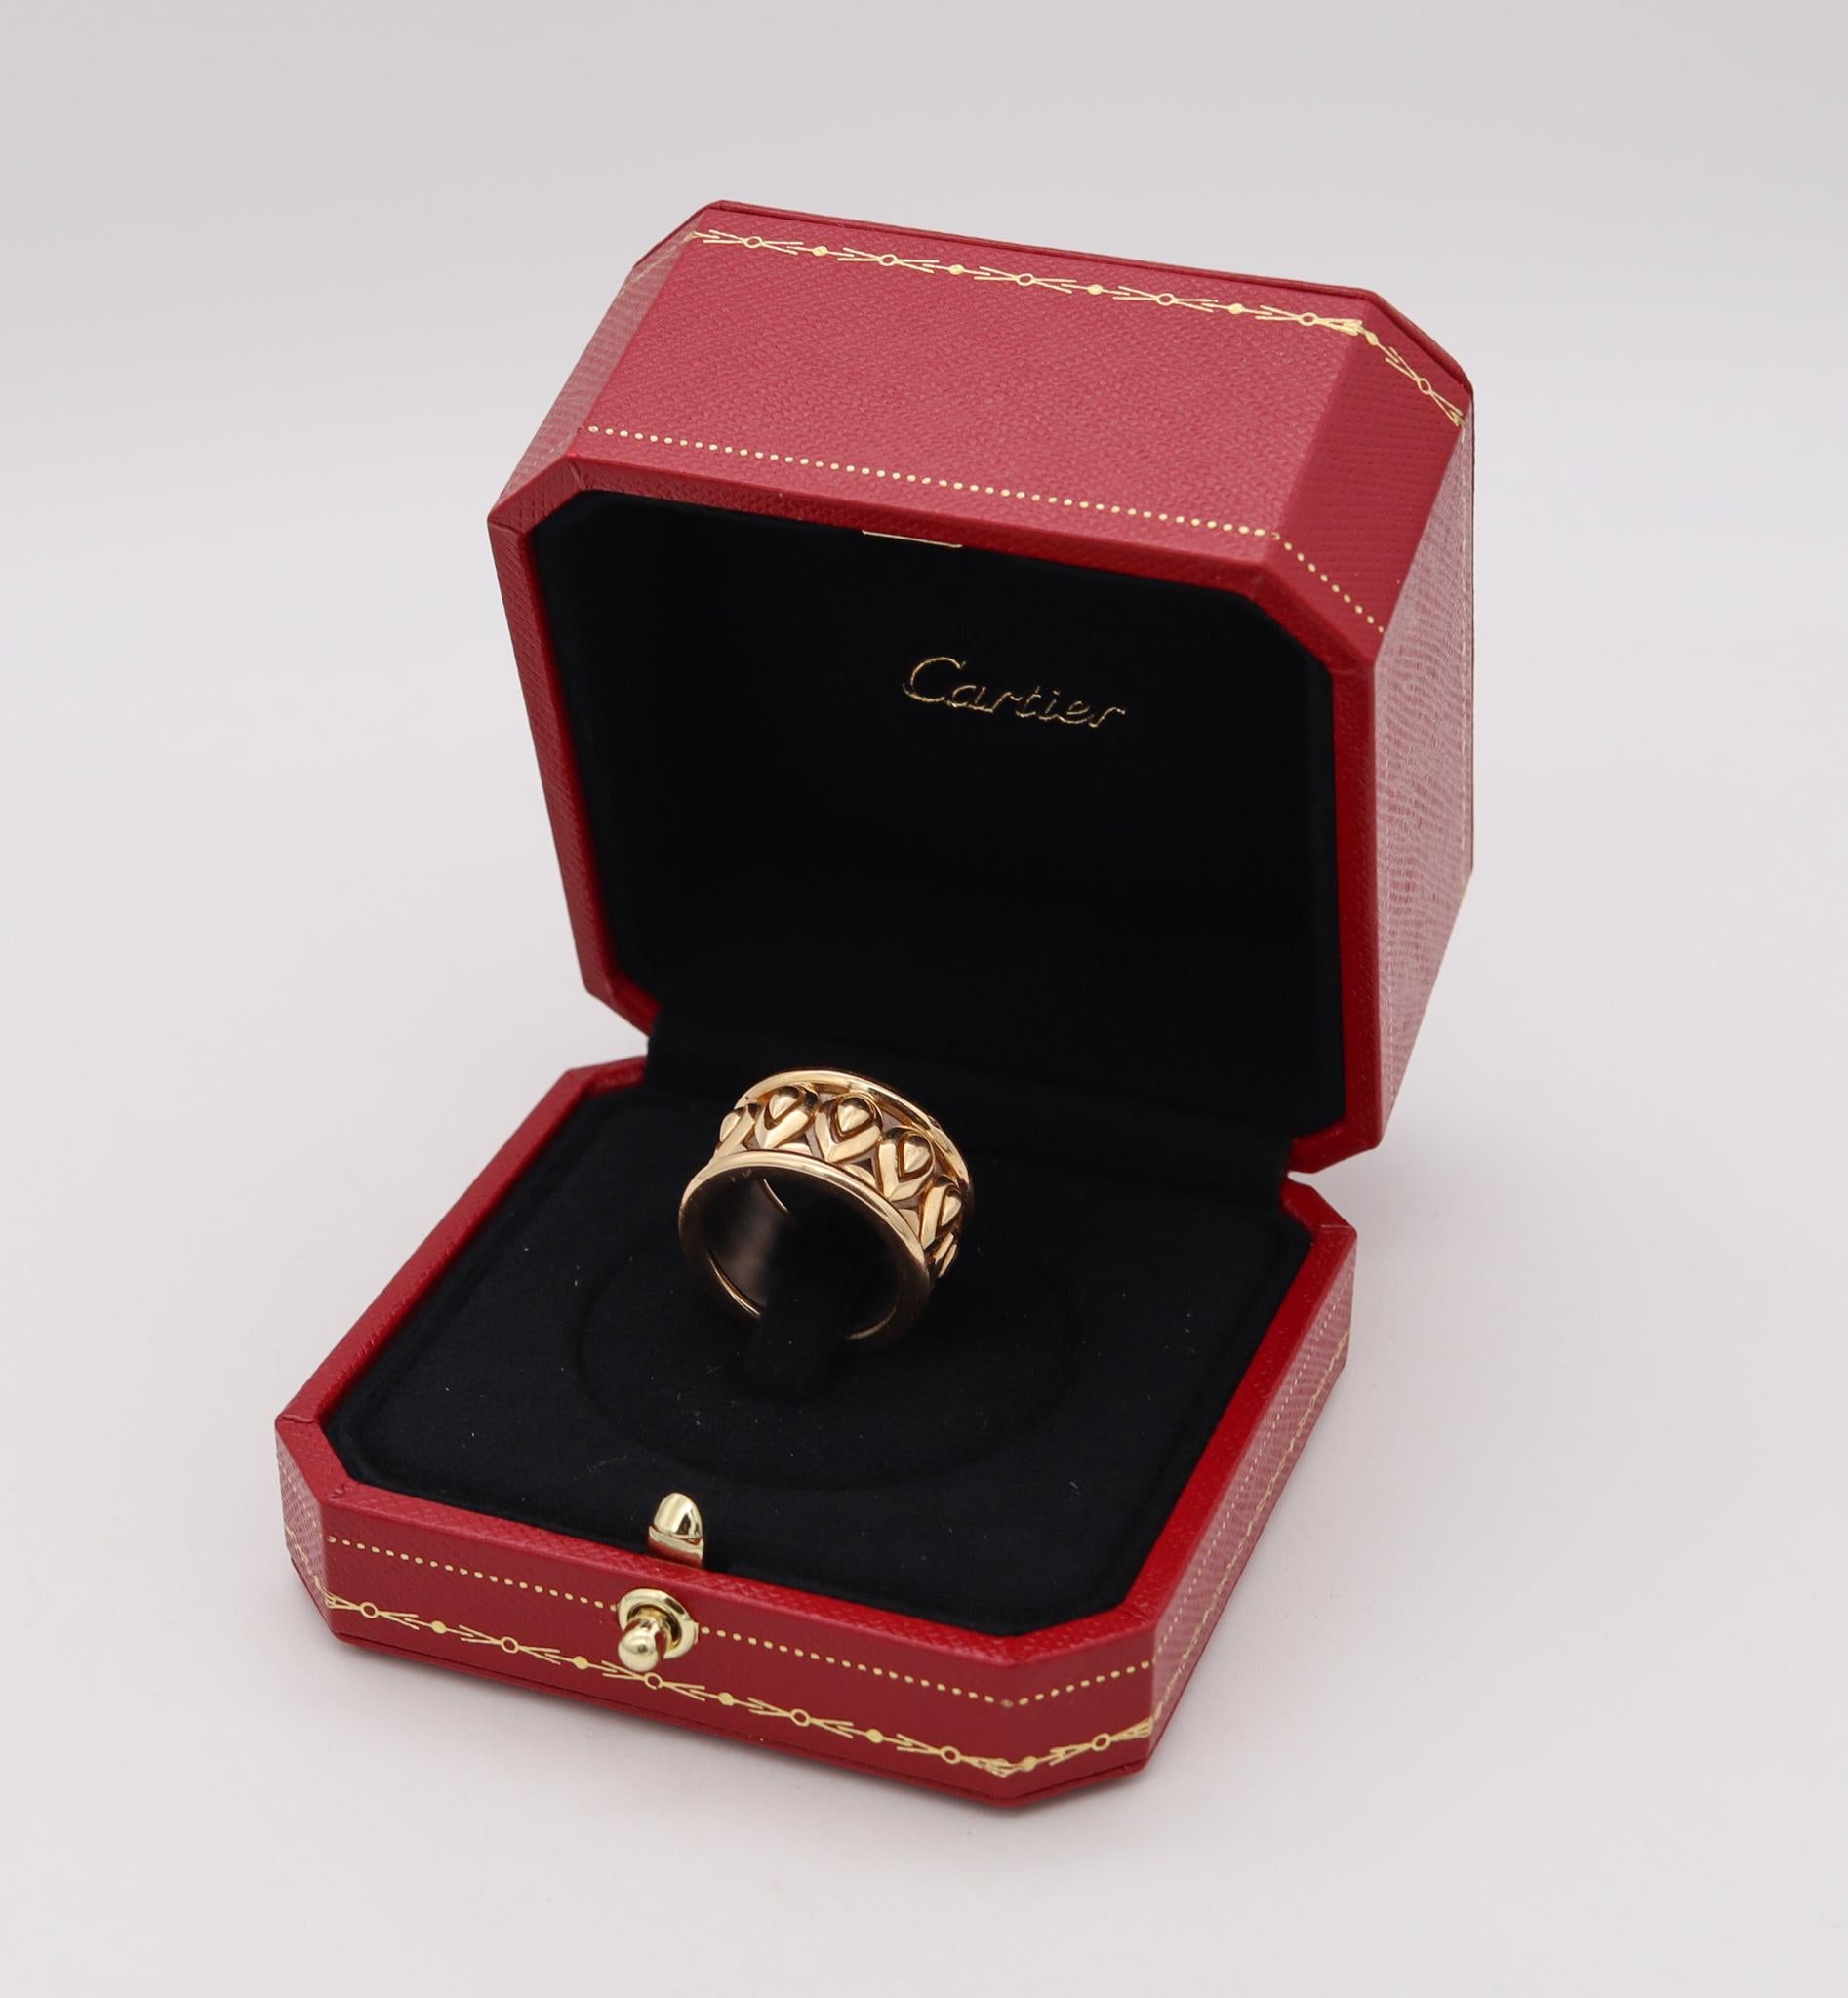 A Tanjore band designed by Cartier.

Beautiful piece, created in Paris France, by the jewelry house of Cartier. This rare ring band has been crafted in solid yellow gold of 18 karats, with a band in white gold creating a great contrast

Has a total